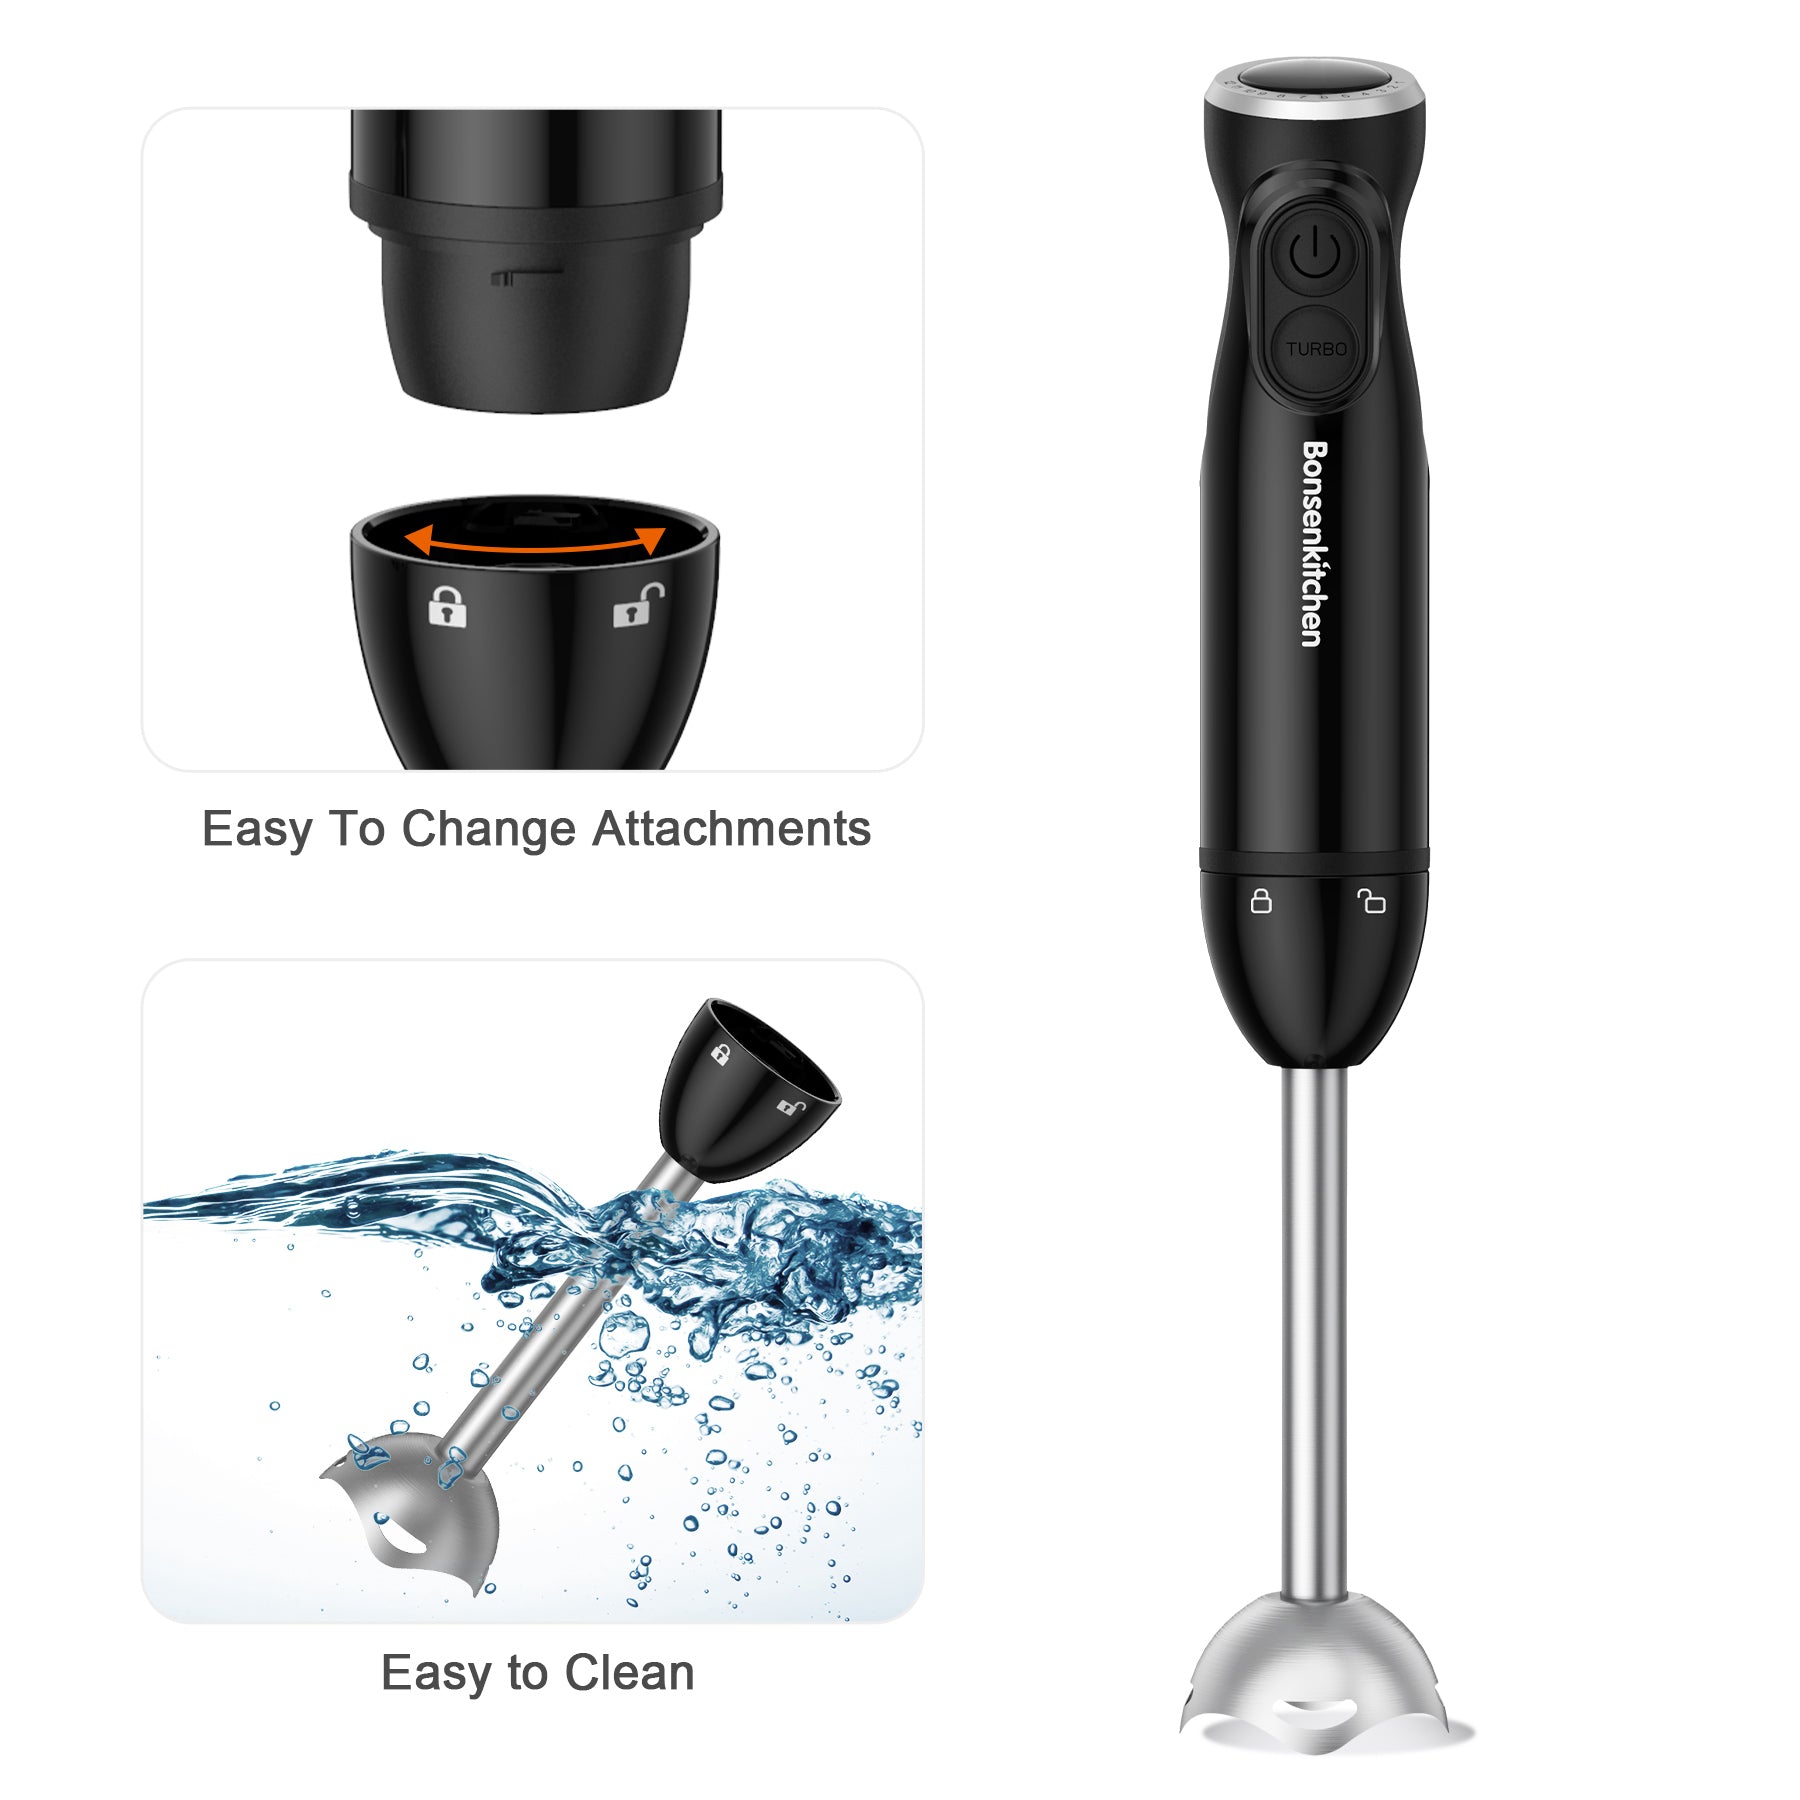 Electric Immersion, Mixer, Variable Speed Control Hand Blender